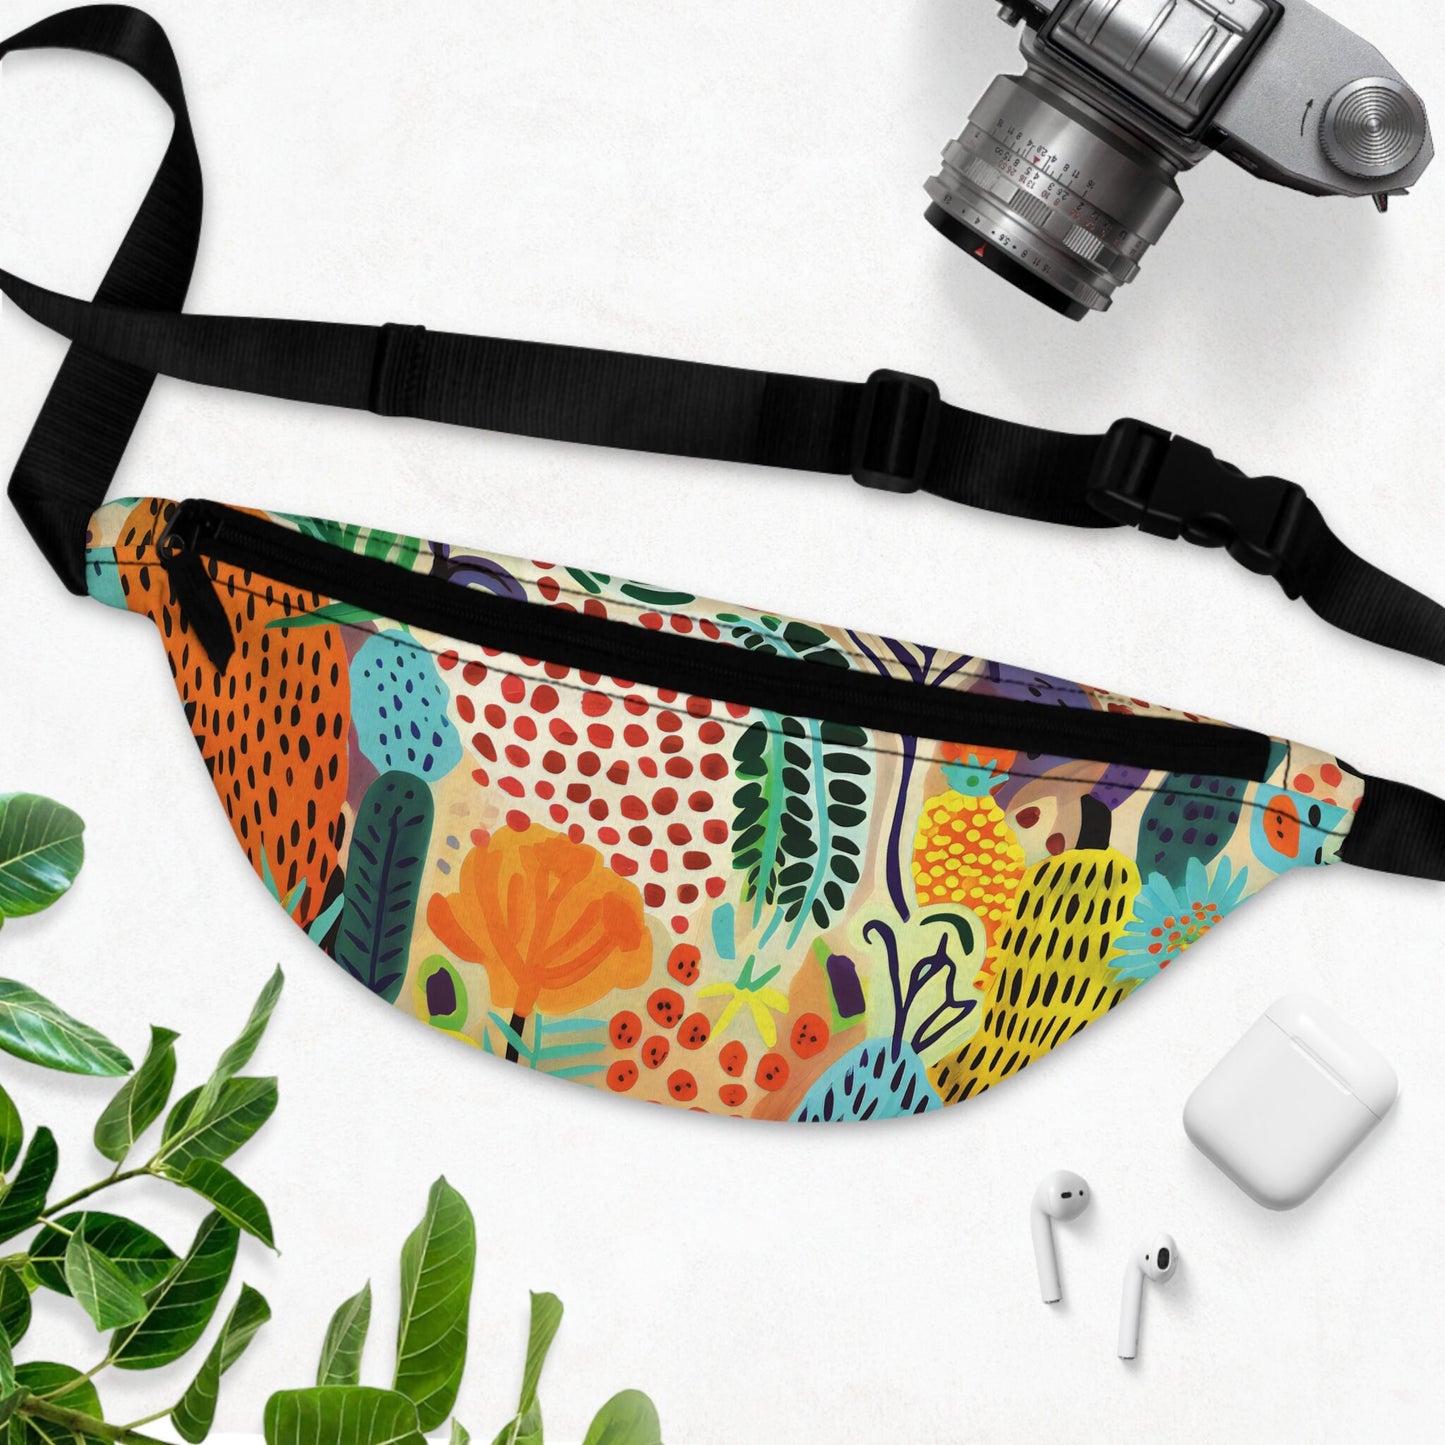 Stylish Plant Pattern Fanny Pack Waist Pouch Botanical Bliss • Stylish Plant Print Bag • Handsfree Adventure Pouch • Durable Polyester Pouch